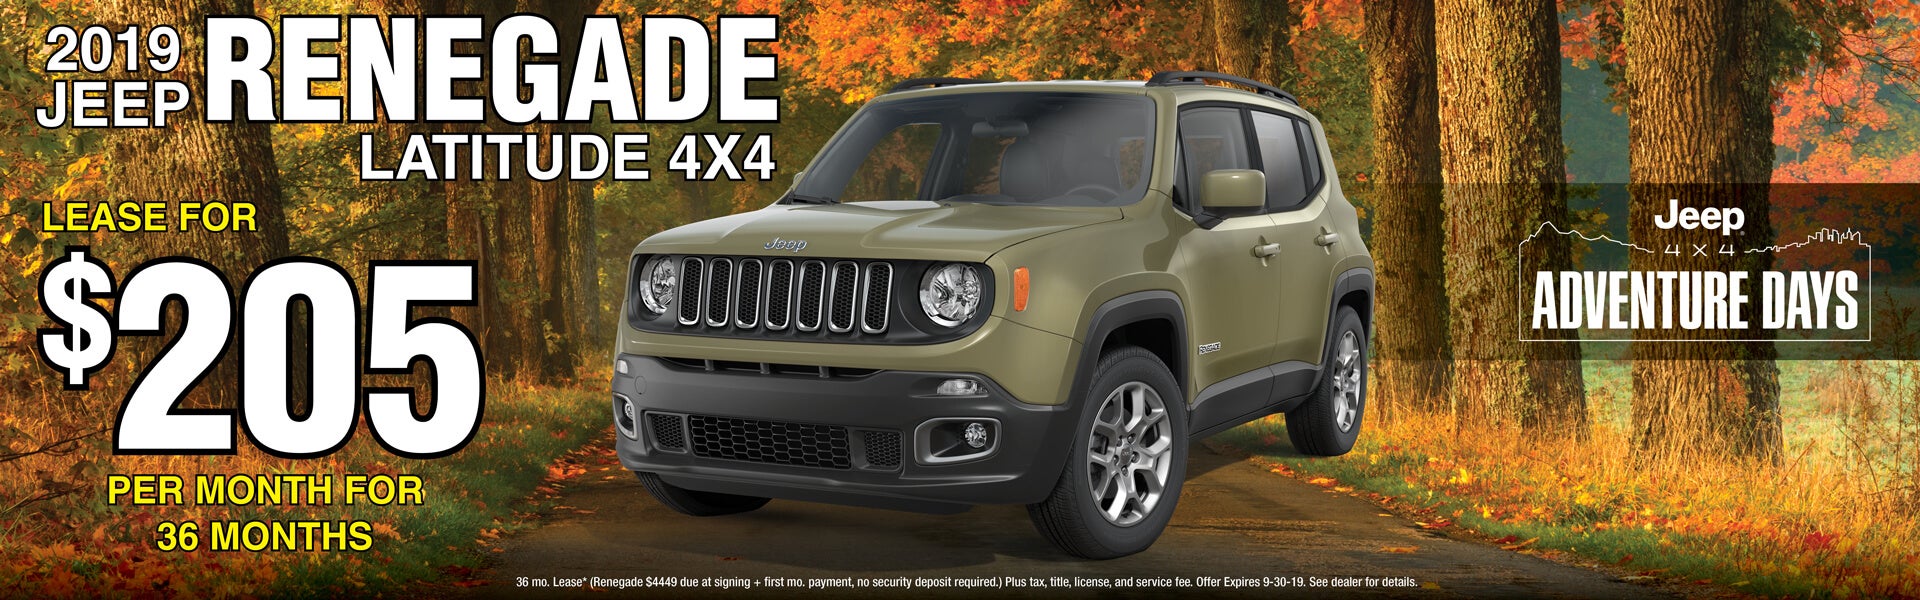 Lease a 2019 Jeep Renegade Latitude for $205/mo for 36 mos.